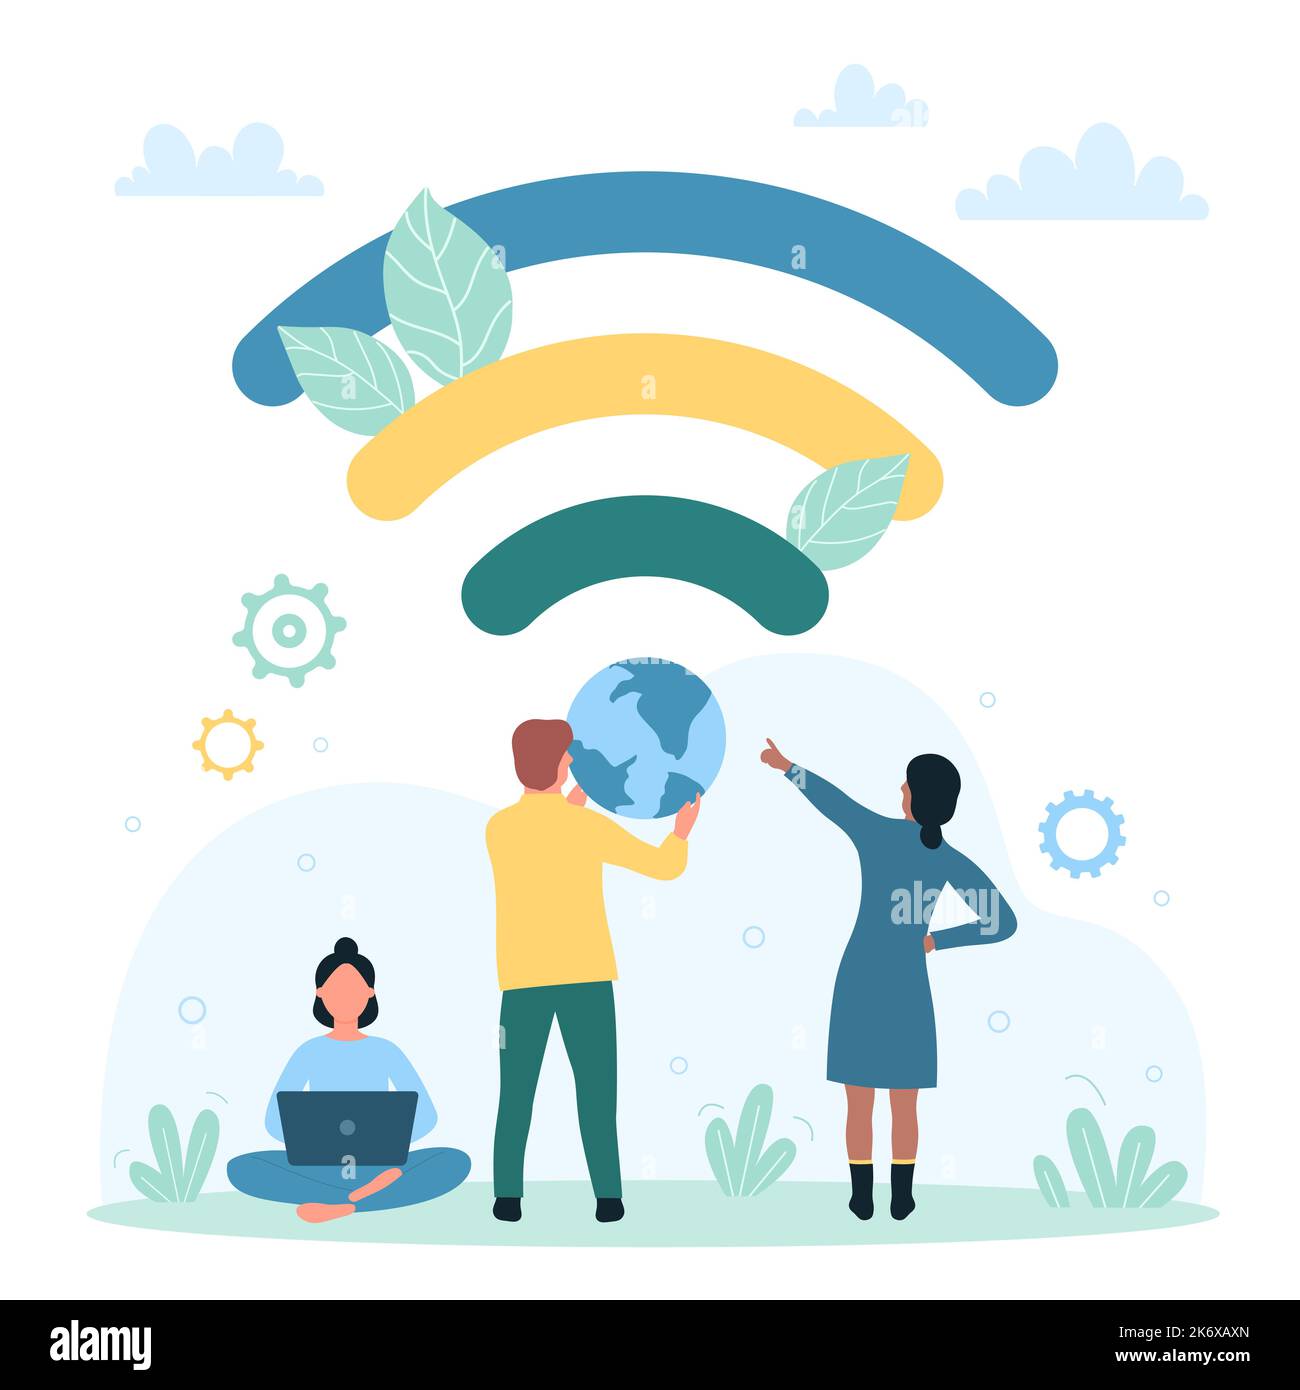 WIFI, connection and public assess vector illustration. Cartoon tiny people in free internet zone using laptop near WIFI sign, hotspot with wireless signal for chat, communication and online work Stock Vector